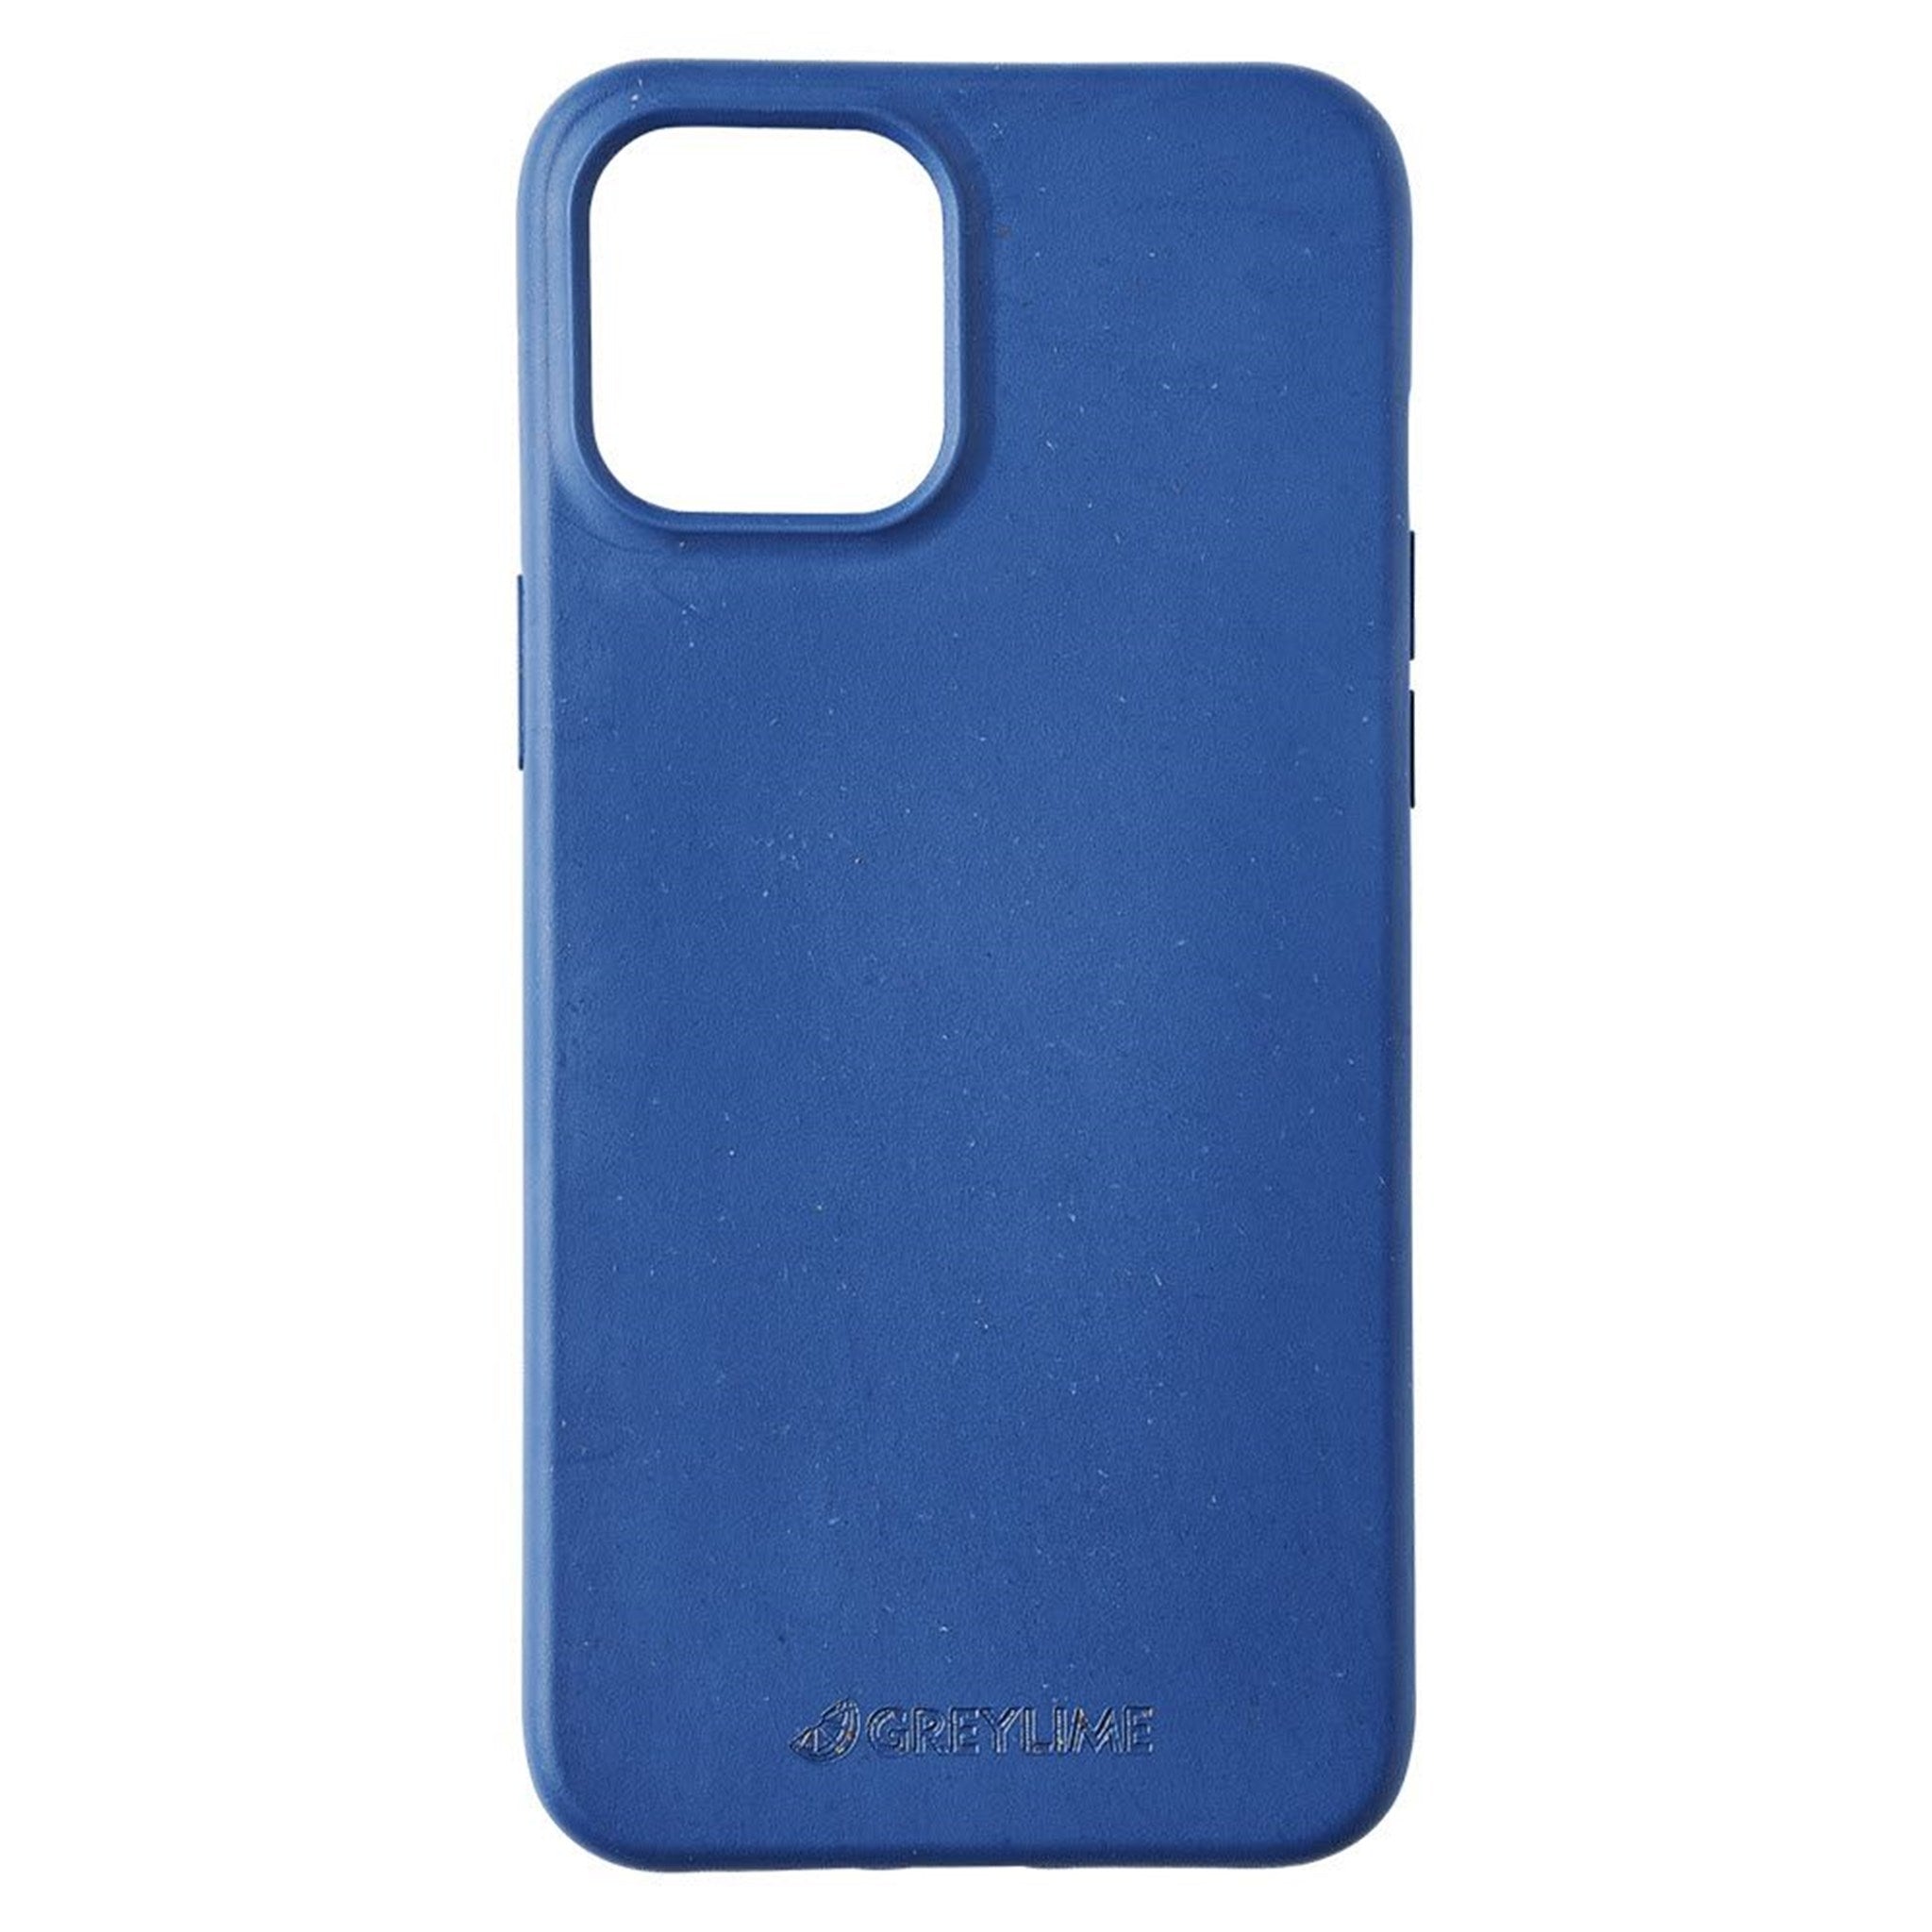 GreyLime-iPhone-12-Pro-Max-Biodegdrable-Cover-Navy-Blue-COIP12L03V3.jpg